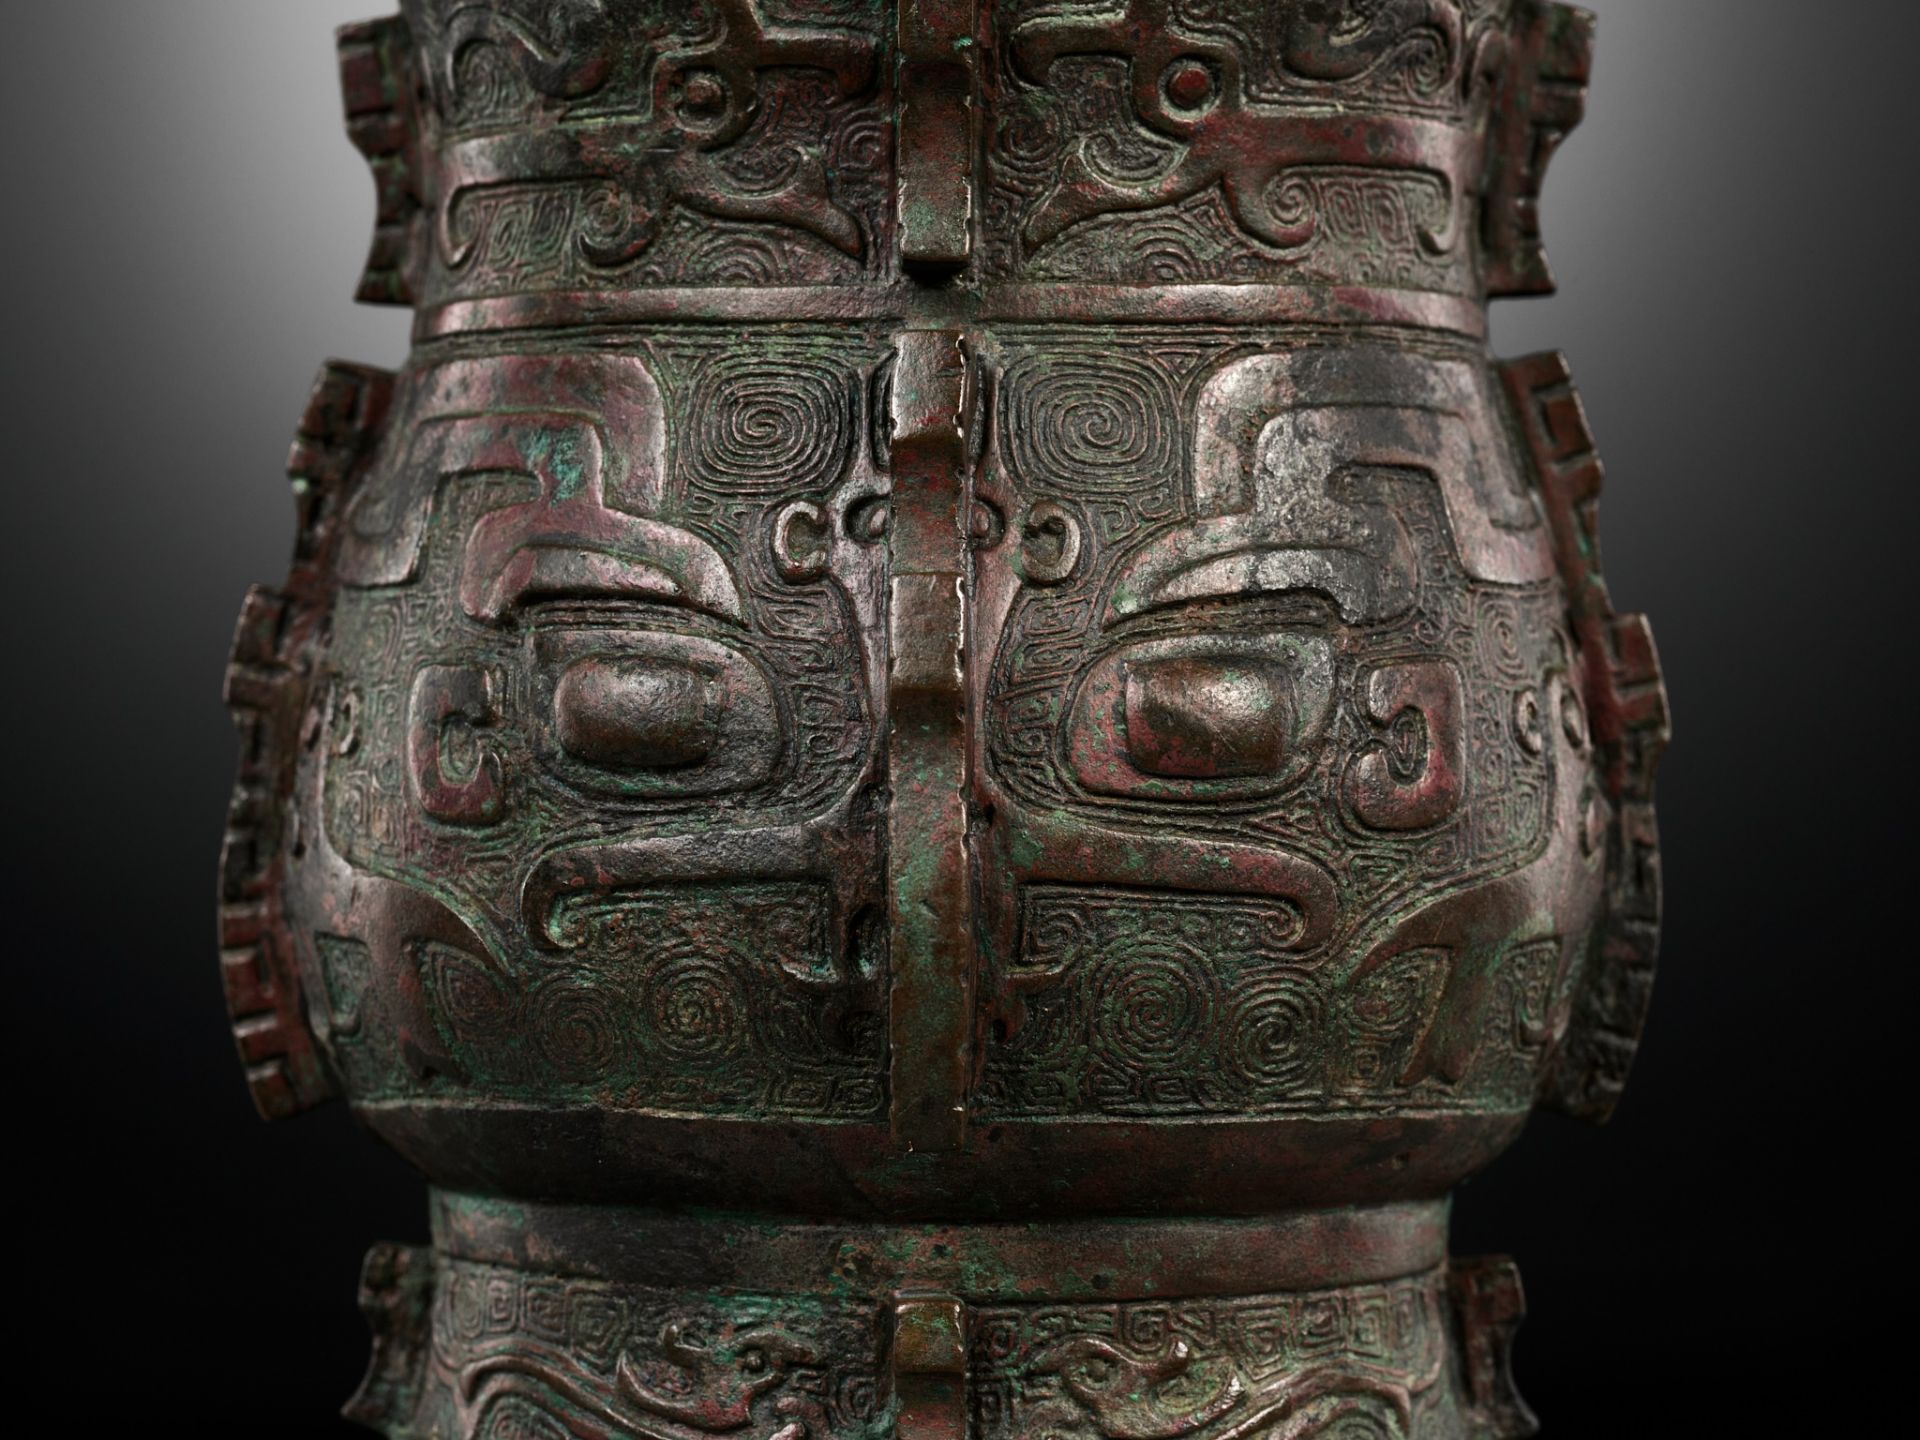 A RARE BRONZE RITUAL WINE VESSEL, ZHI, SHANG DYNASTY, CHINA, 13TH-12TH CENTURY BC - Image 10 of 25